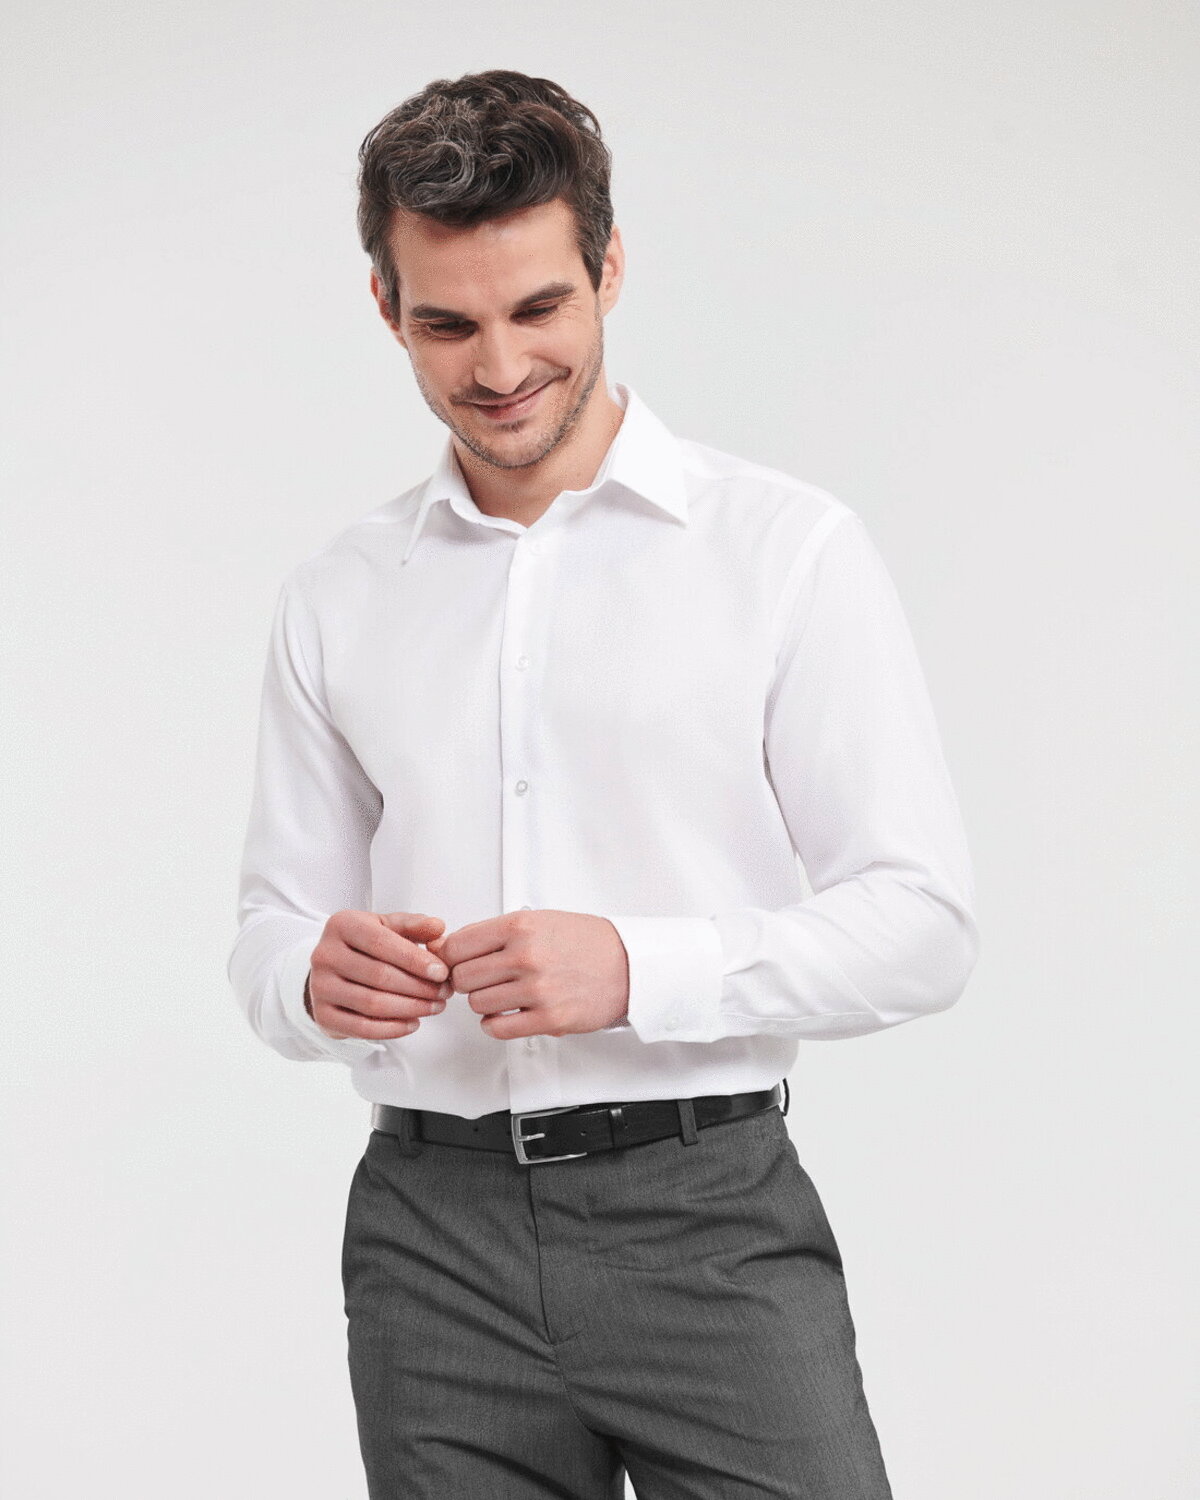 MENS LONG SLEEVE TAILORED ULTIMATE NON IRON SHIRT